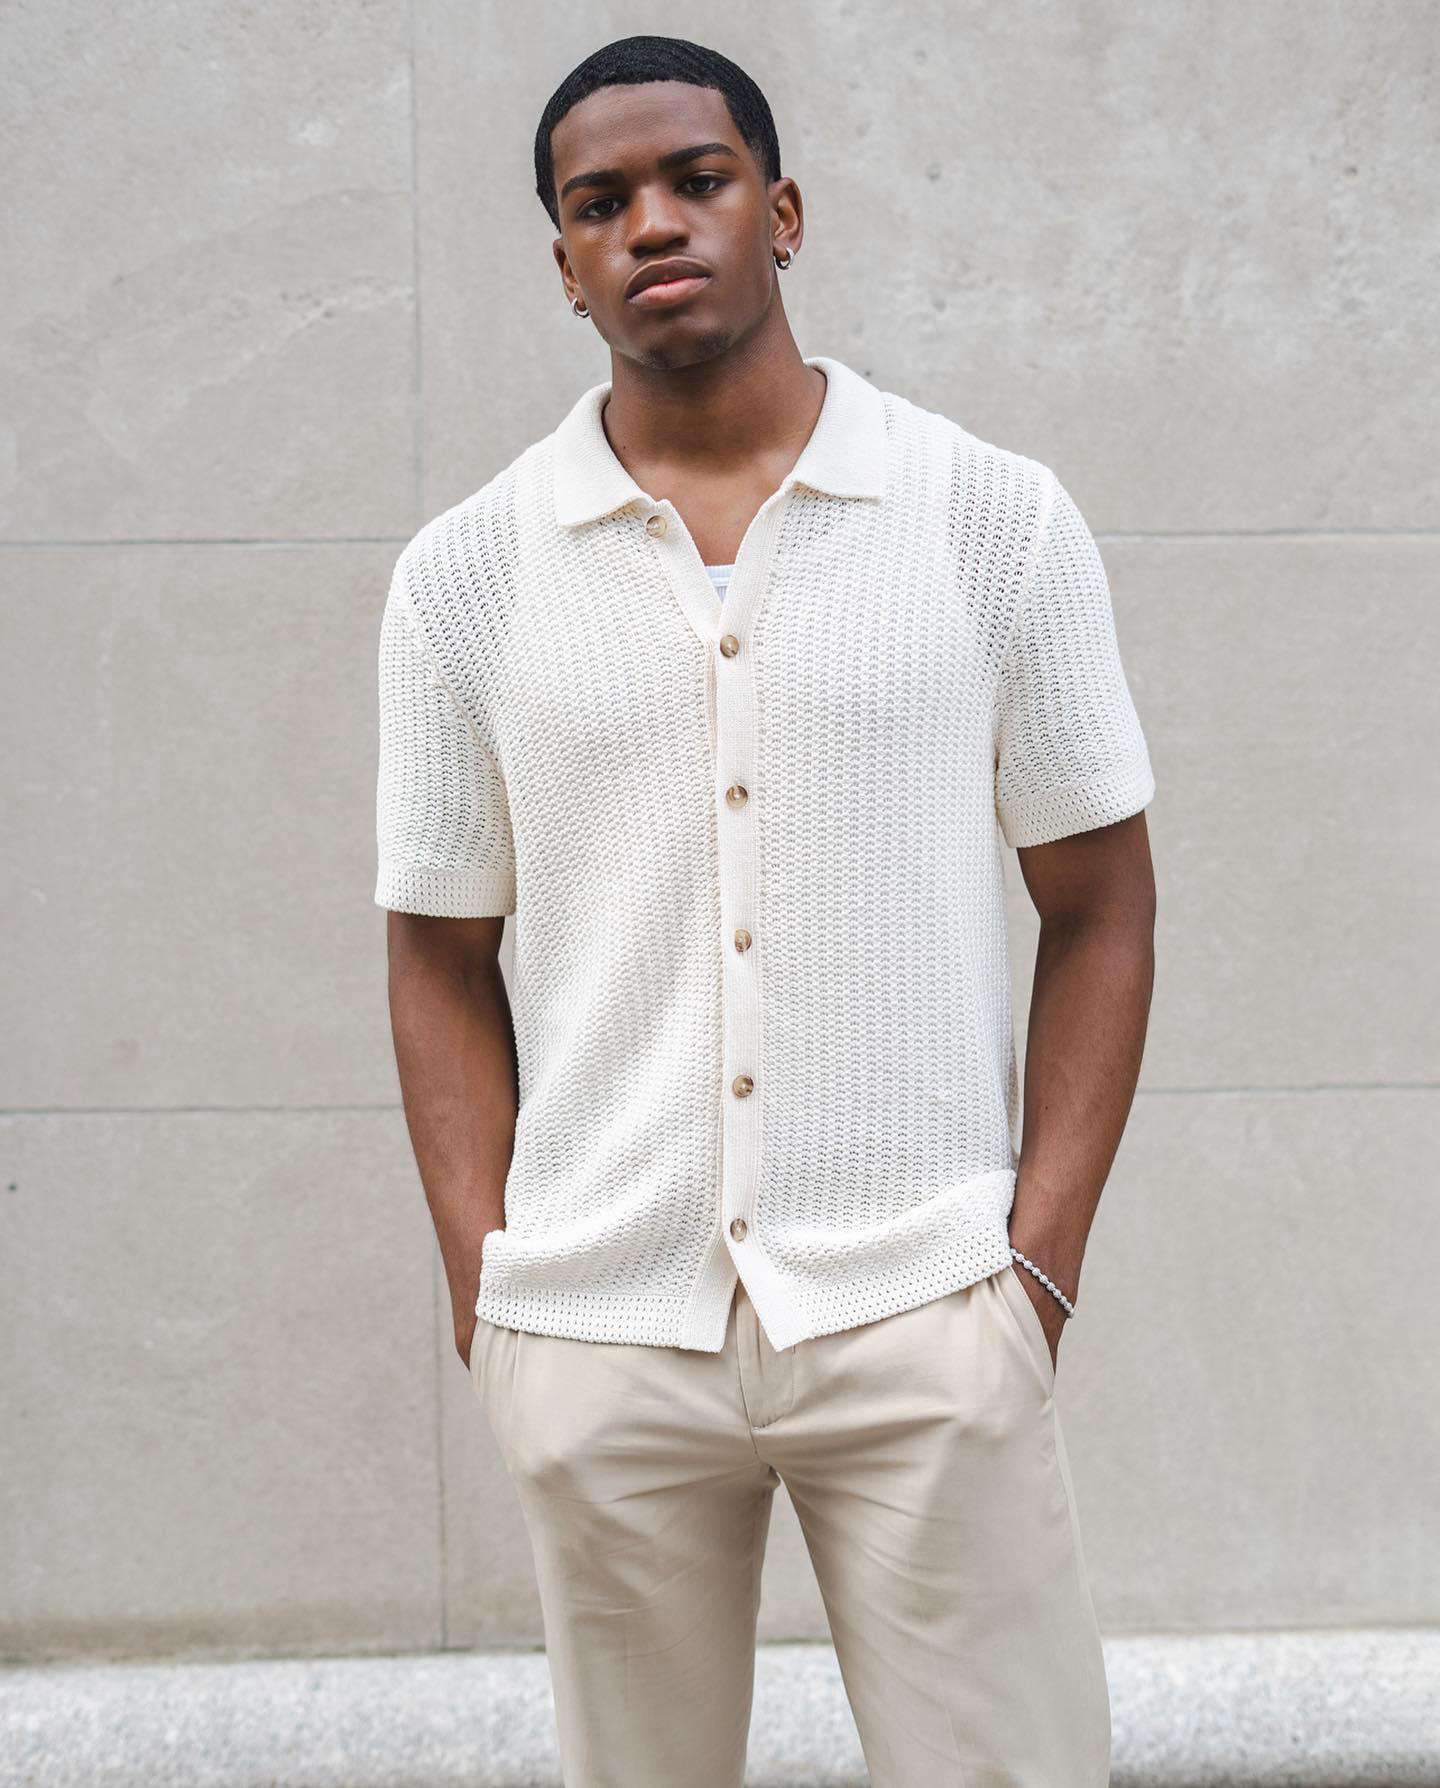 image  1 Layton Lamell - Swish crochet shirts for the summer time breezes